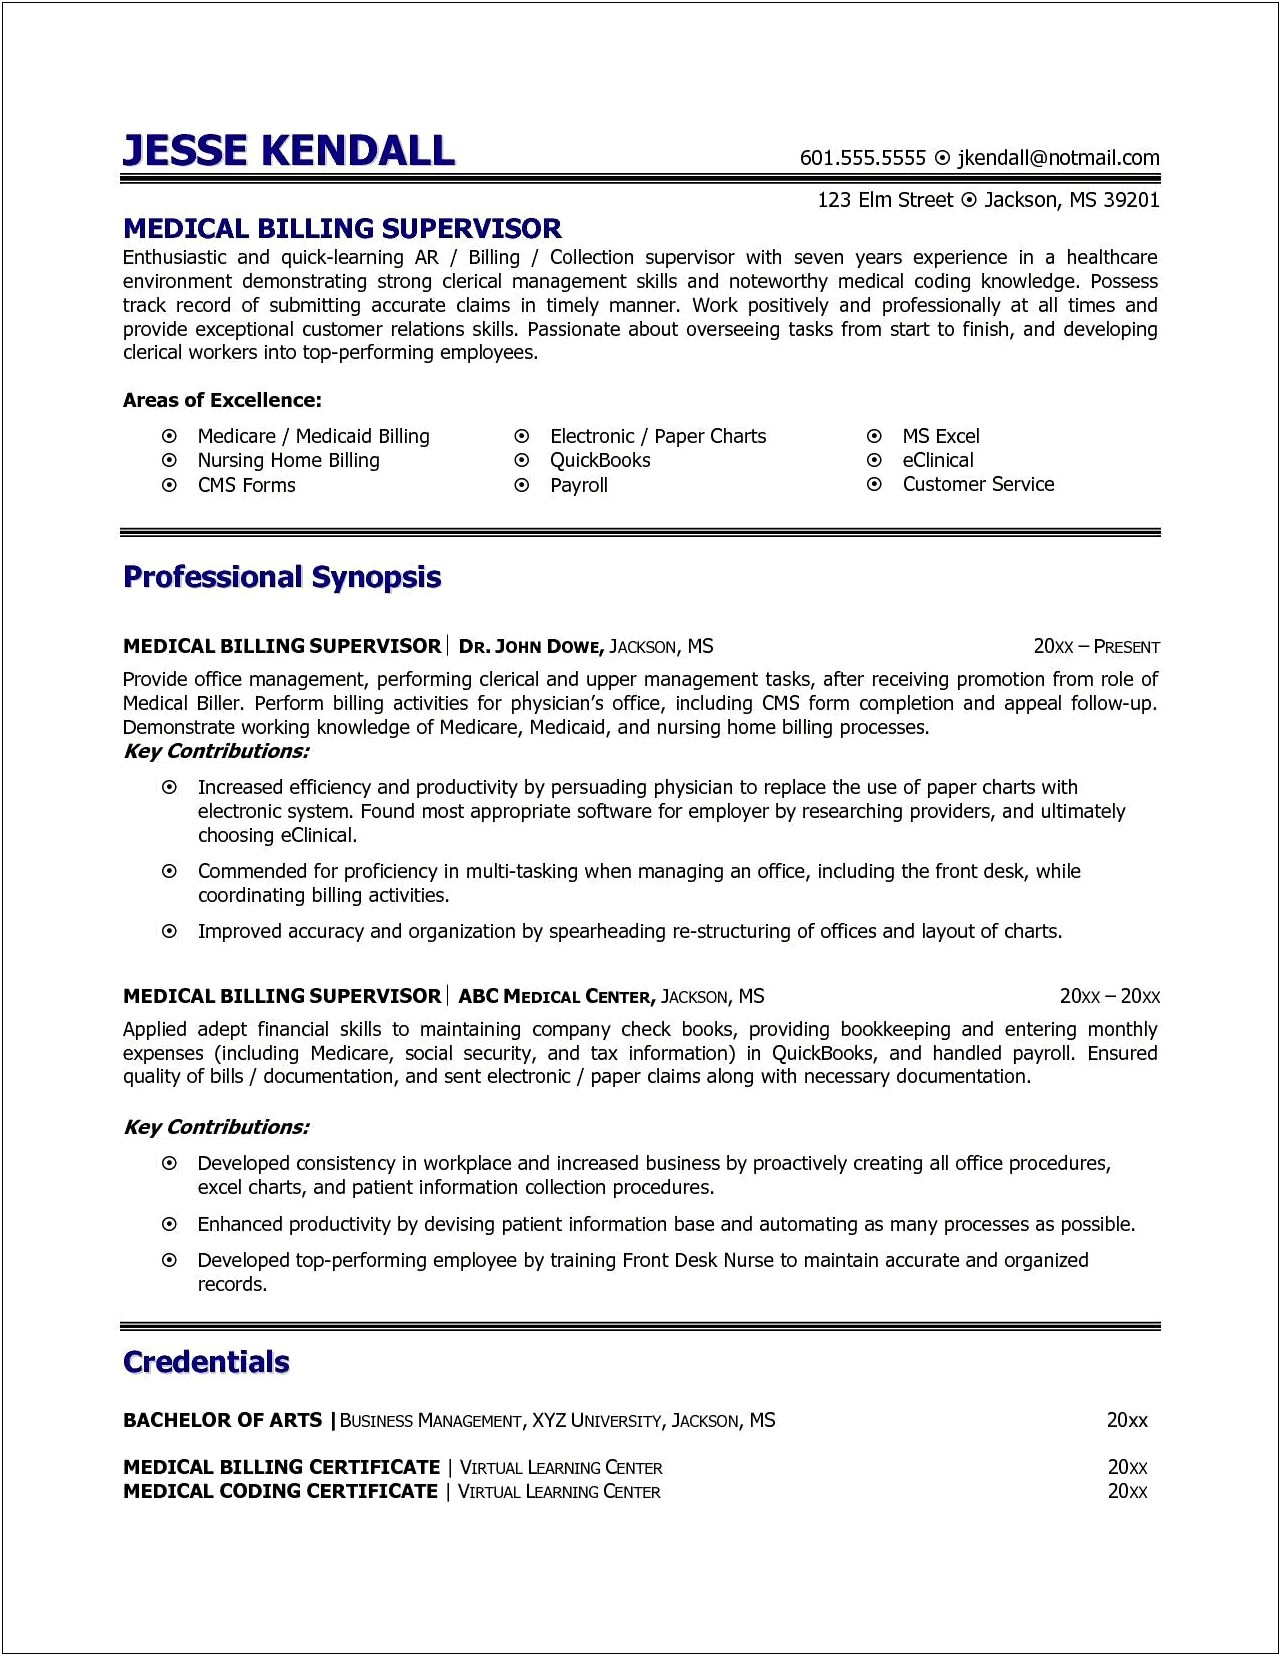 Medical Coding And Billing Resume Template